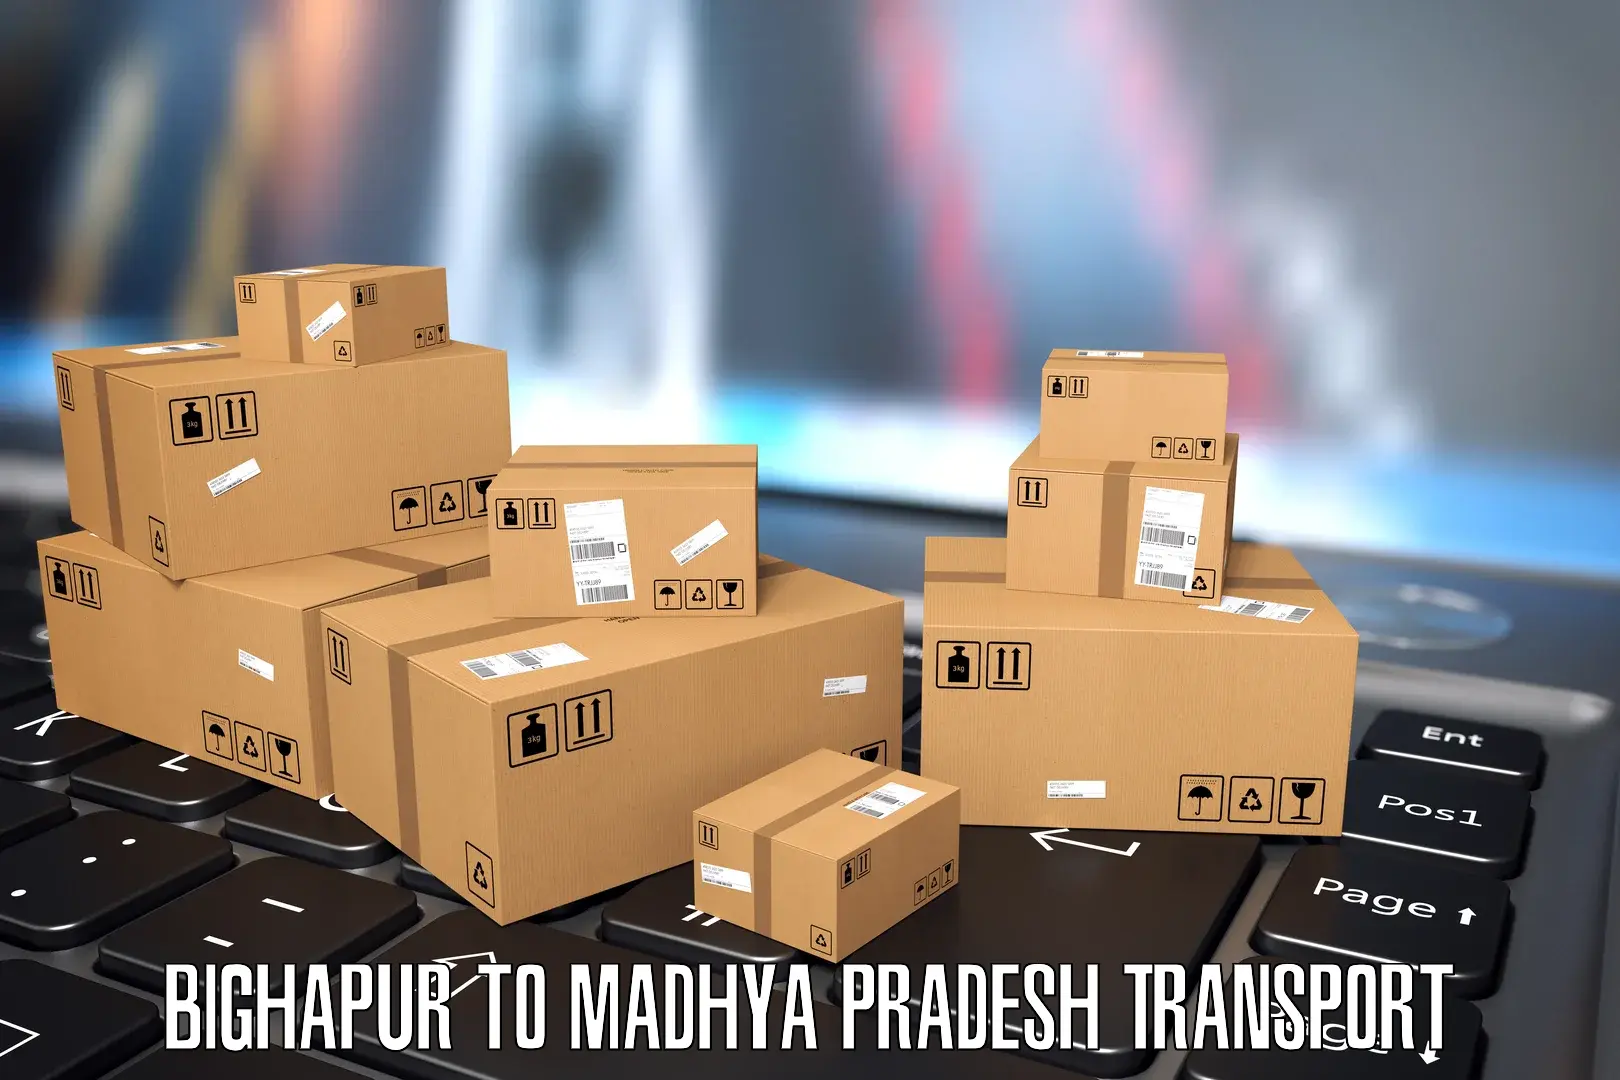 Goods delivery service Bighapur to Bina